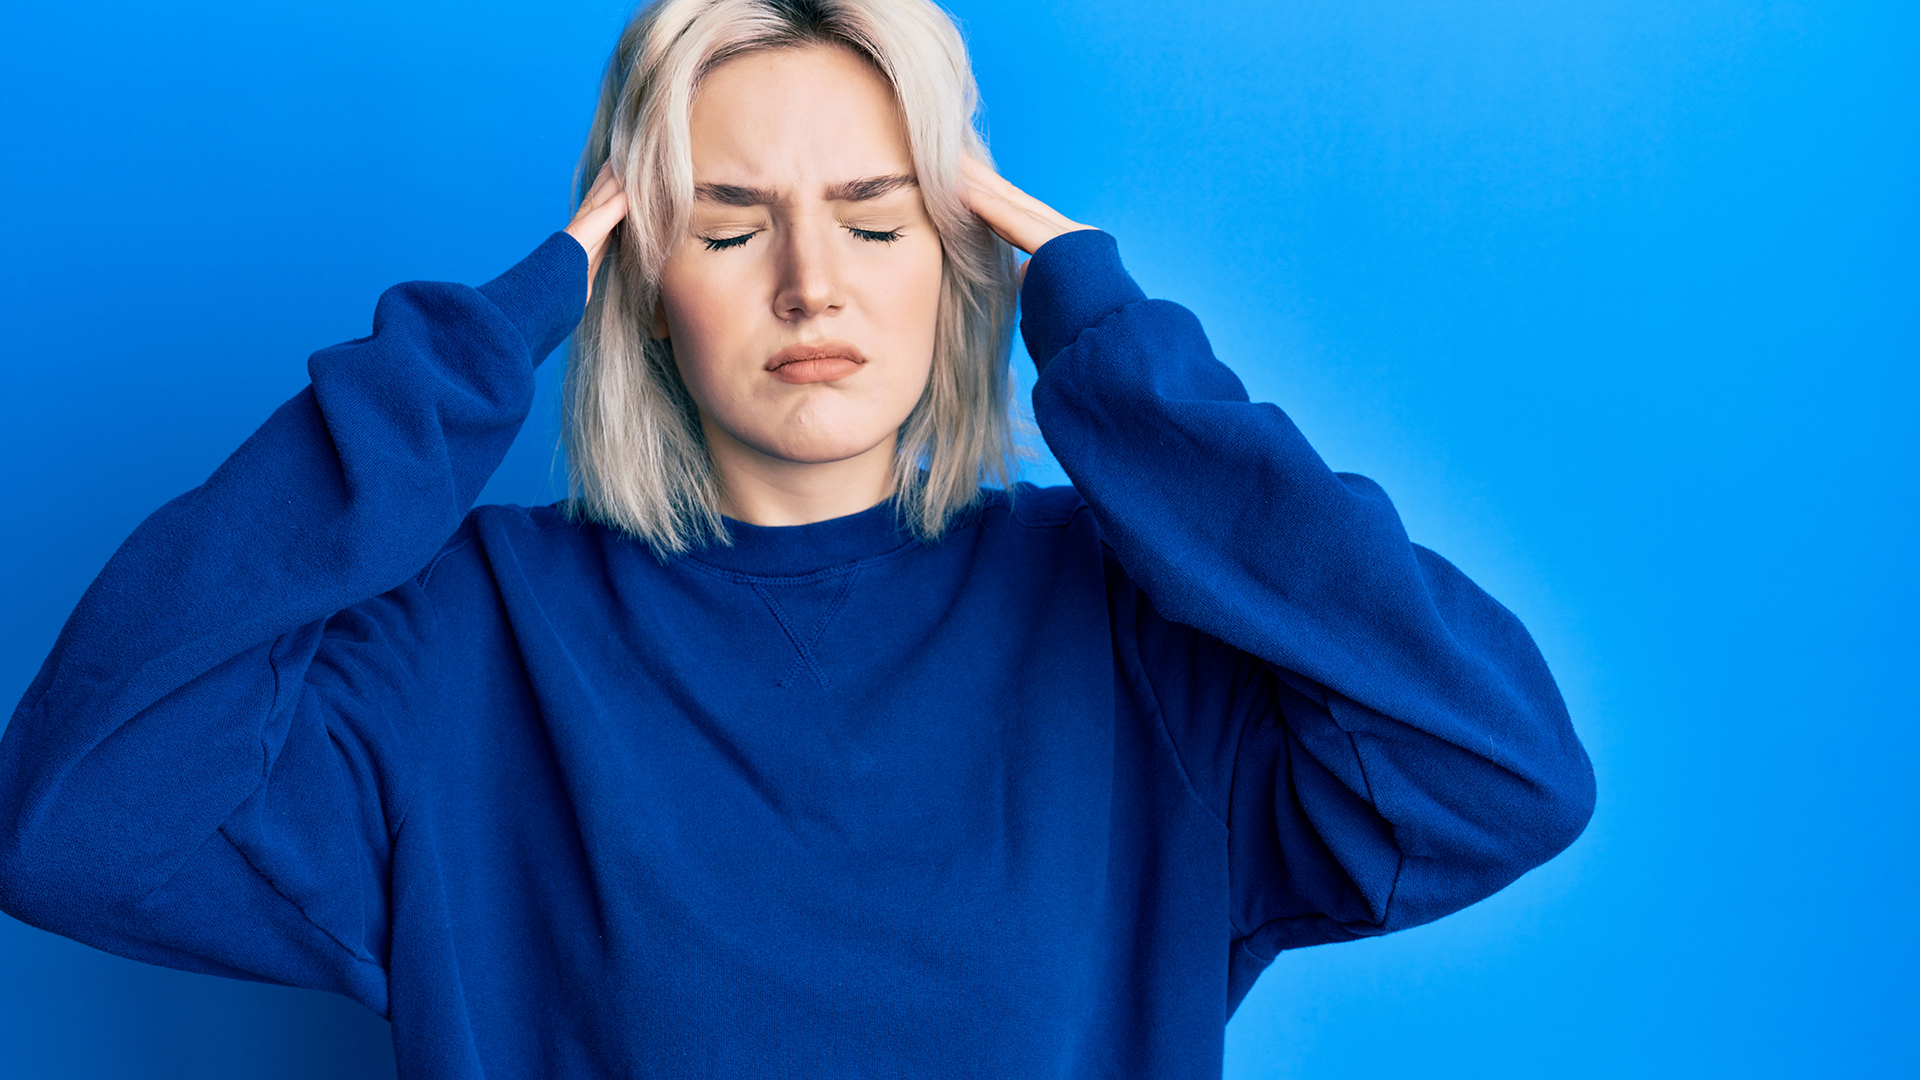 Women tend to suffer more from chronic cluster headache